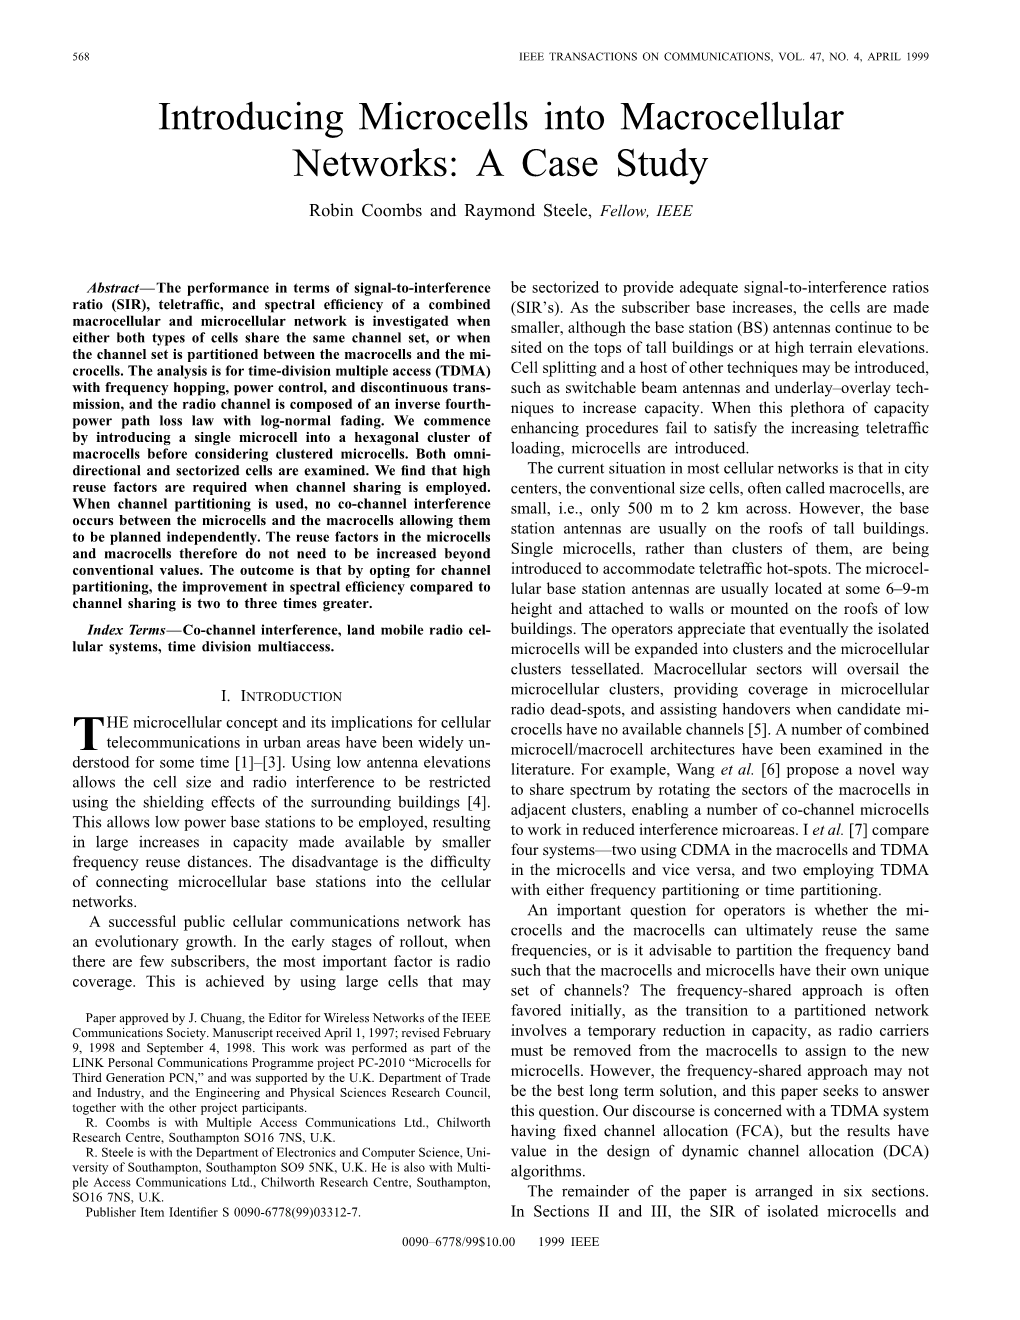 Introducing Microcells Into Macrocellular Networks: a Case Study